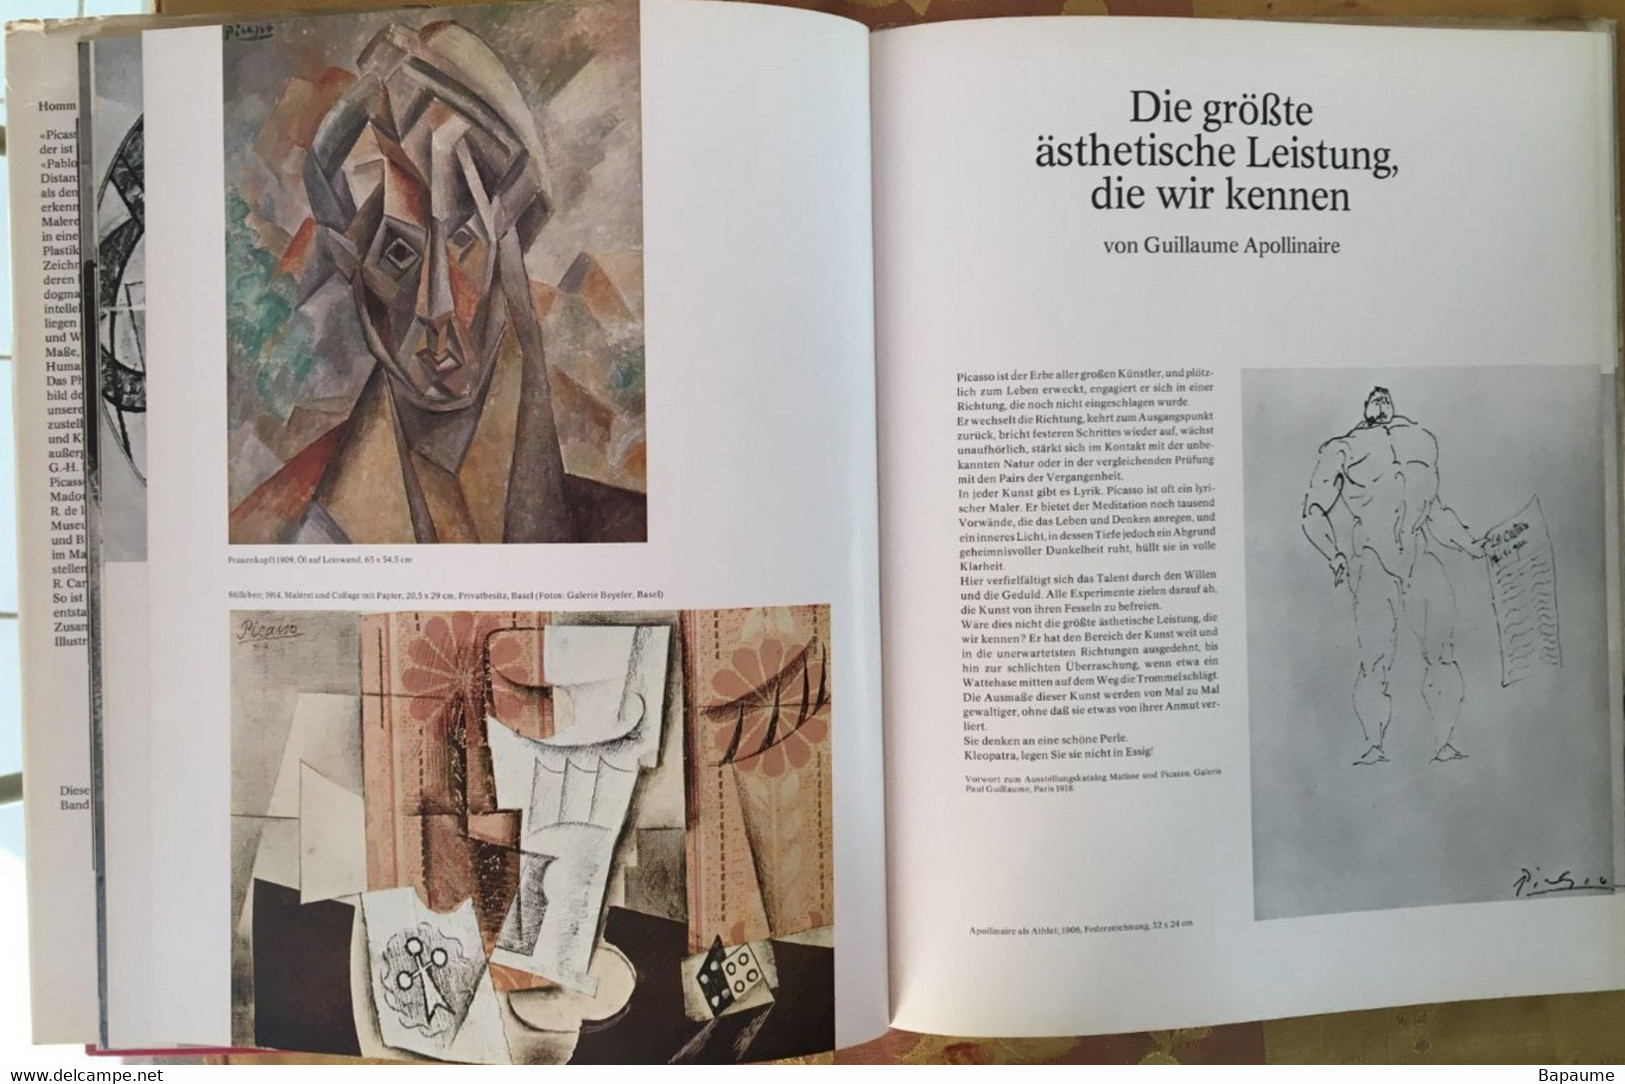 Hommage à Pablo Picasso - Ebeling Verlag Wiesbaden 1976 - Painting & Sculpting